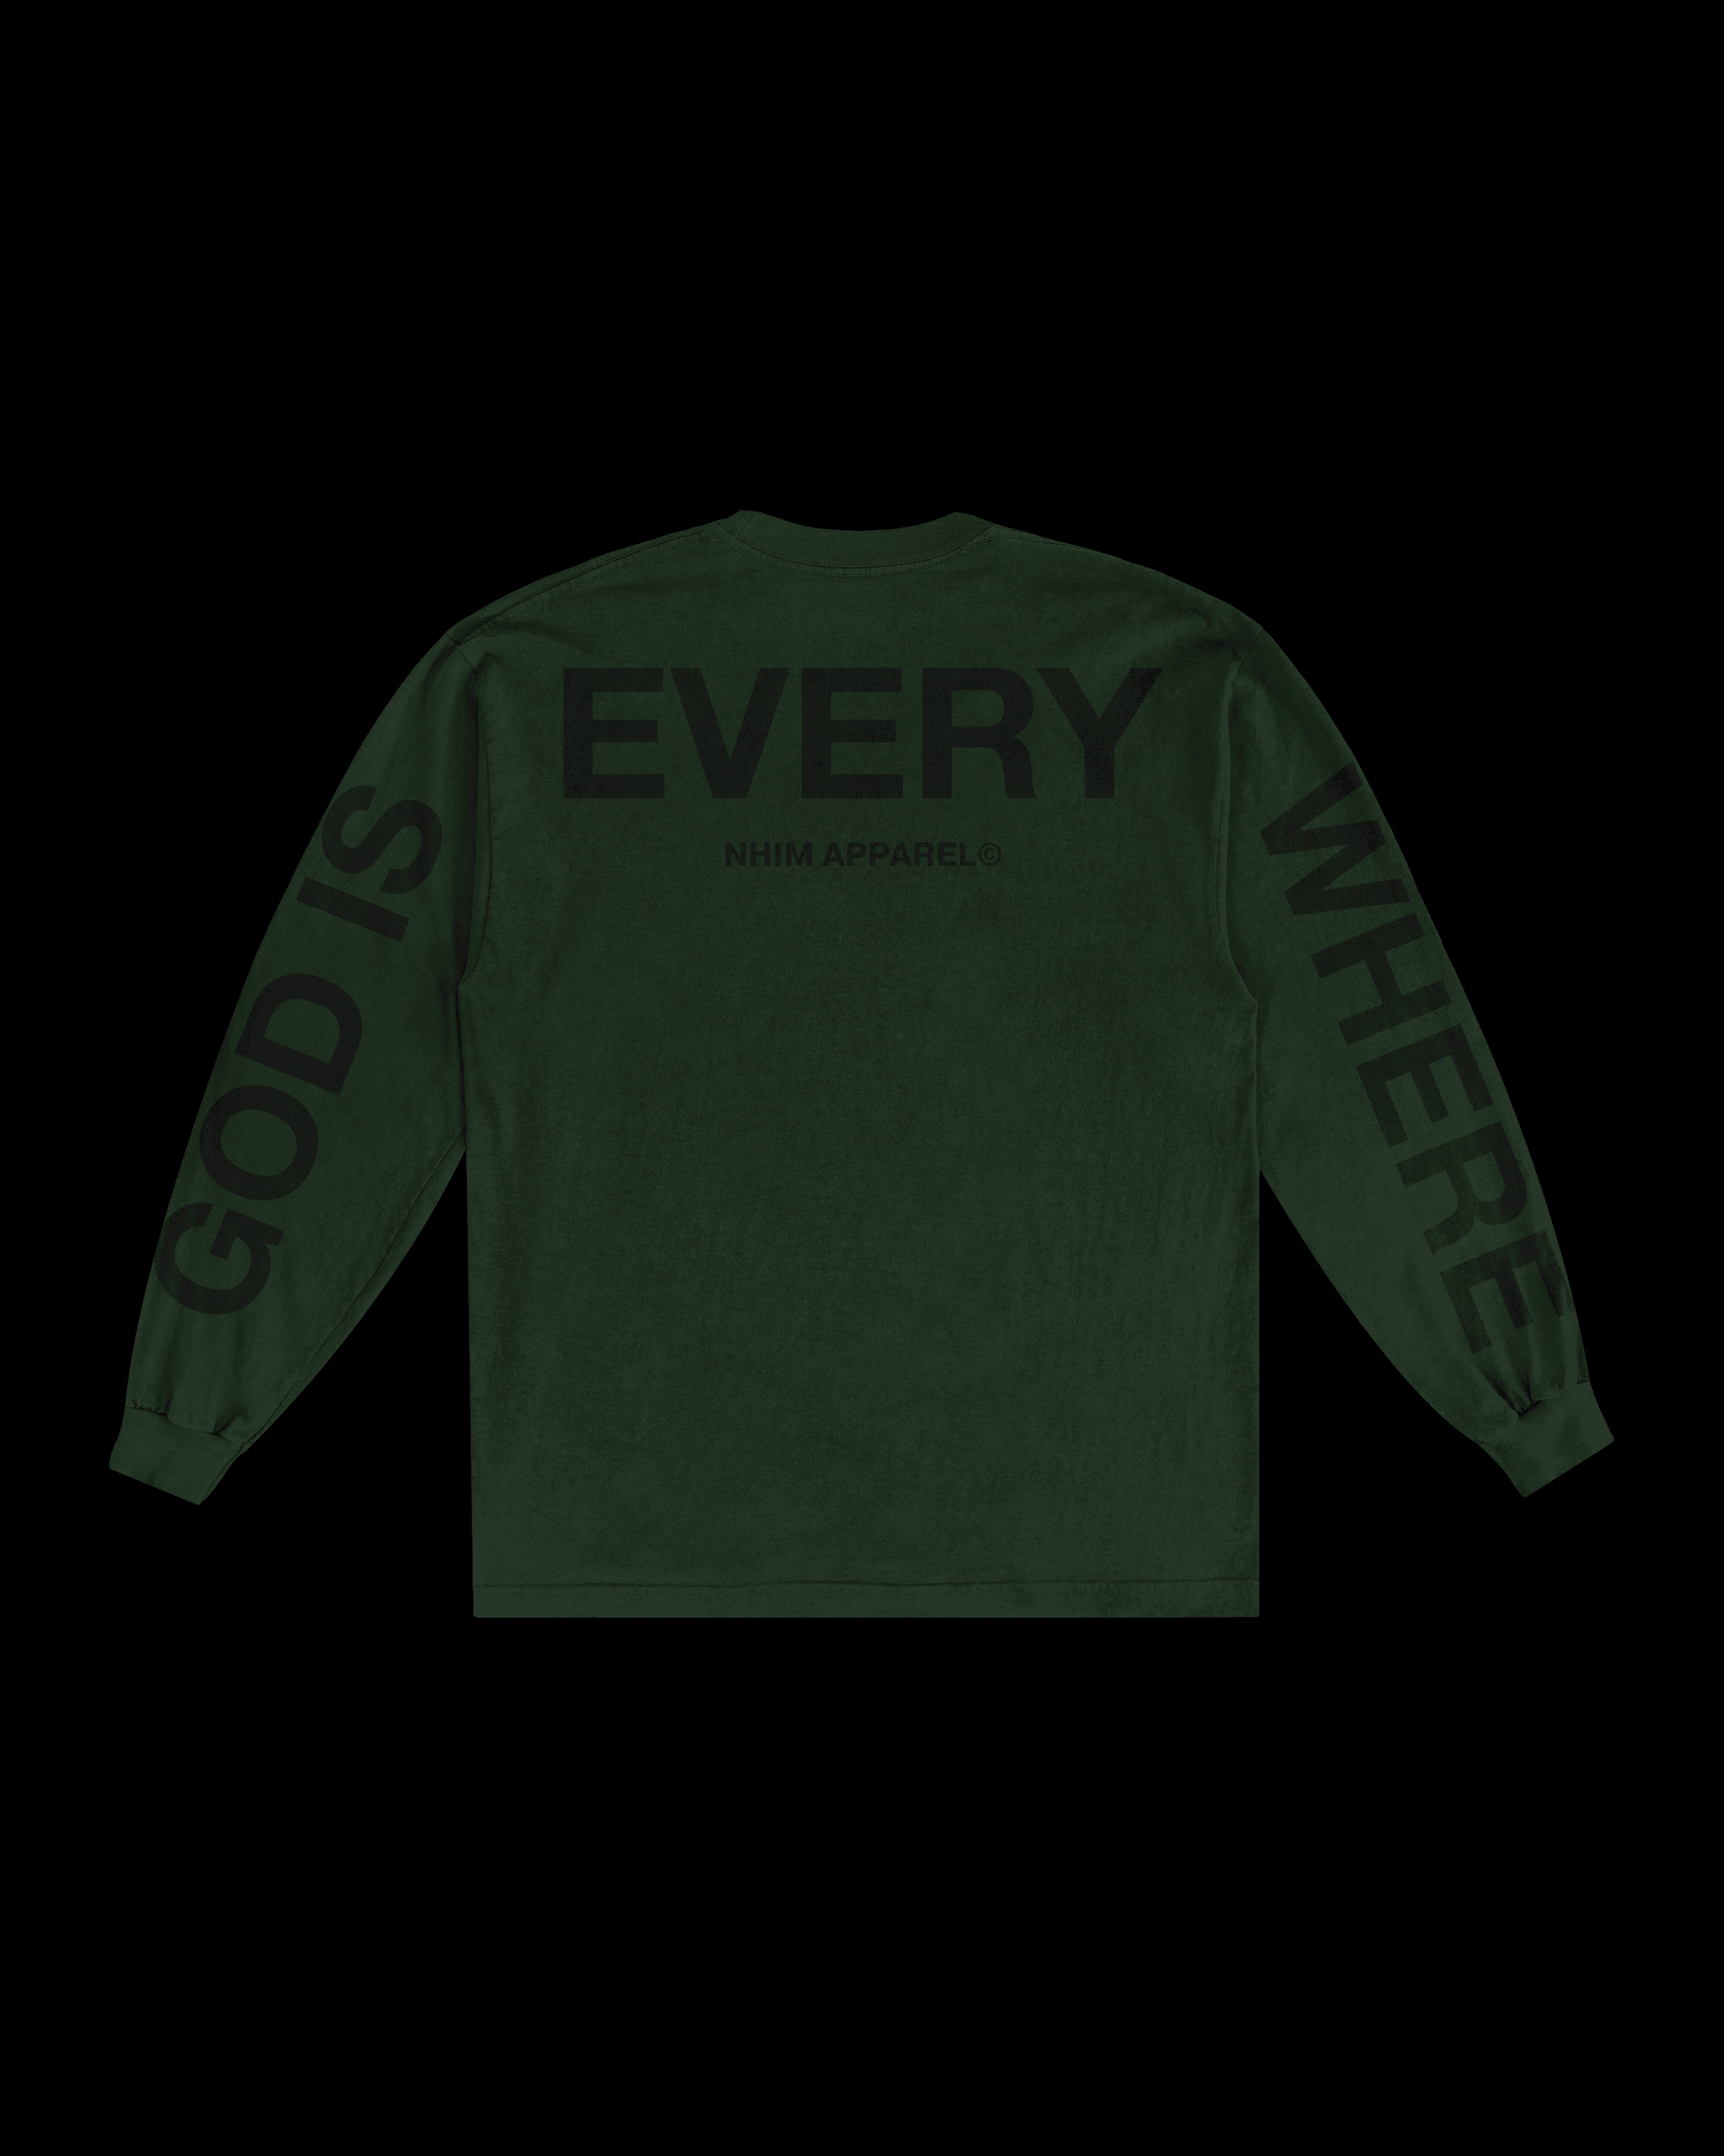 God Is Everywhere ivy color long sleeve christian shirt by NHIM Apparel christian clothing brand